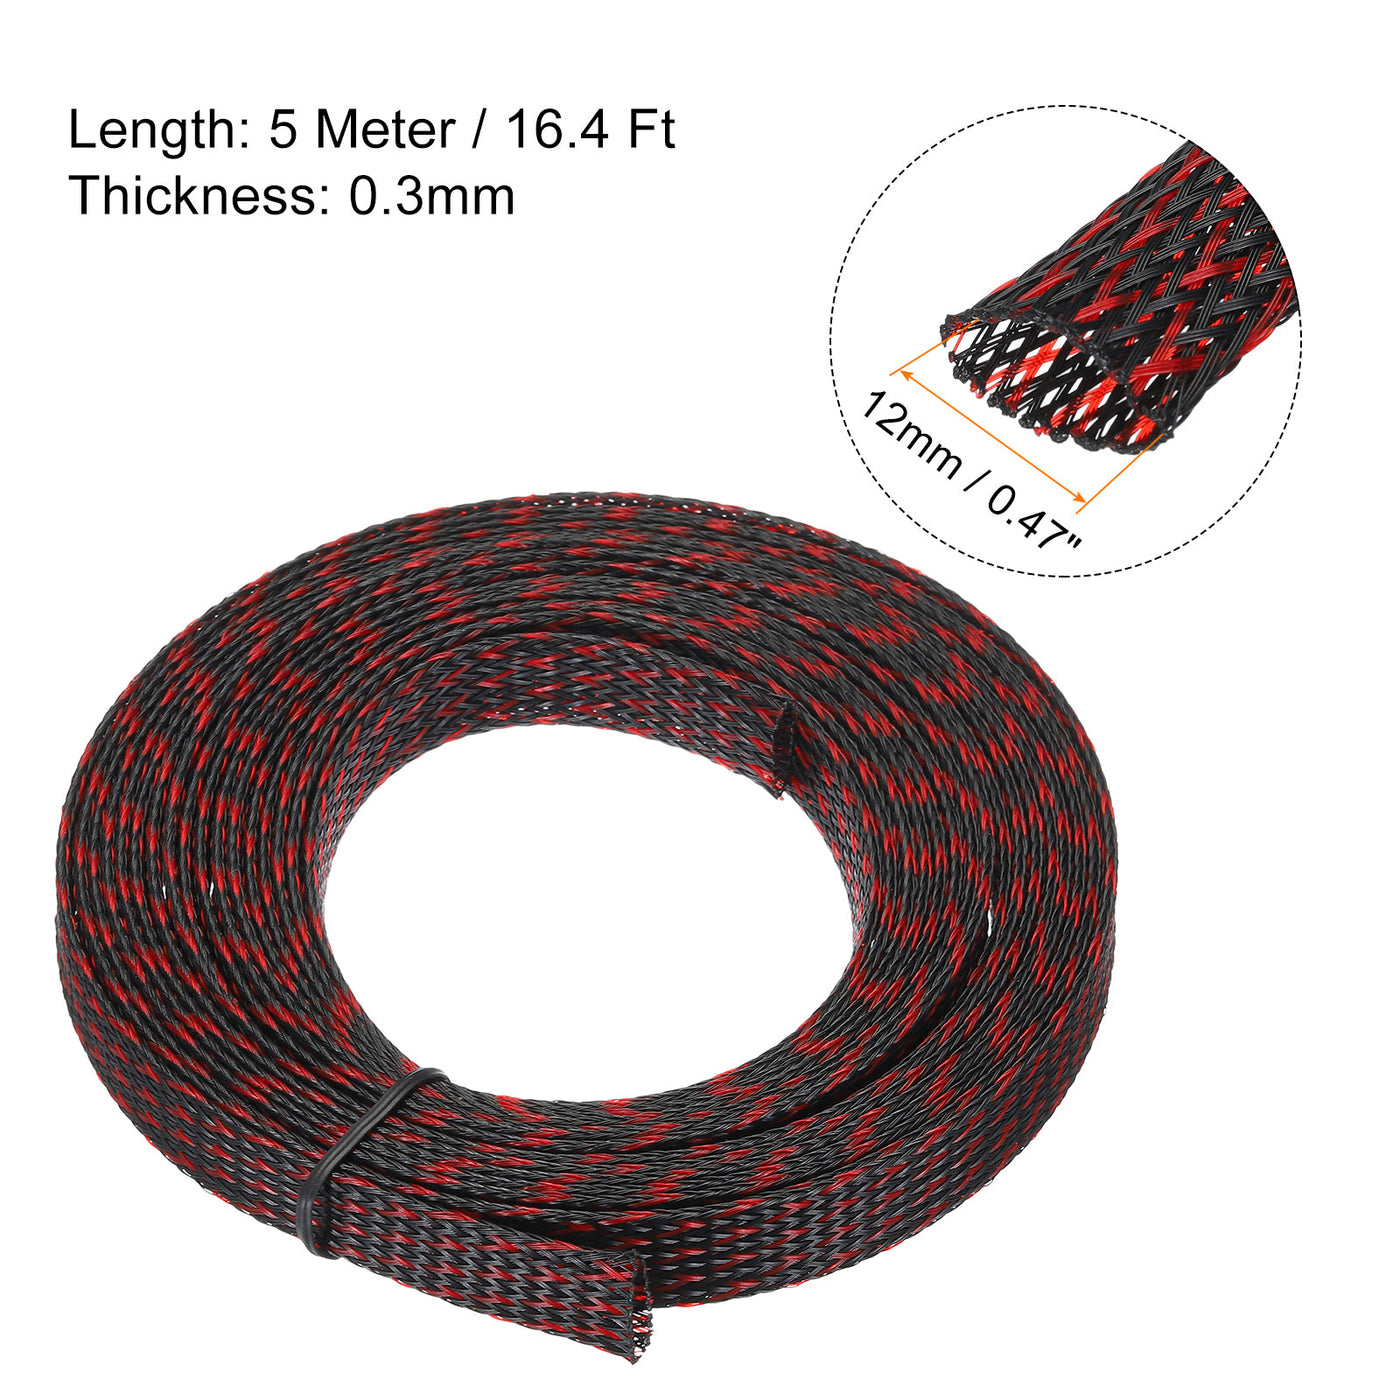 uxcell Uxcell Insulation Braid Sleeving, 16.4 Ft-12mm High Temperature Sleeve Black Red